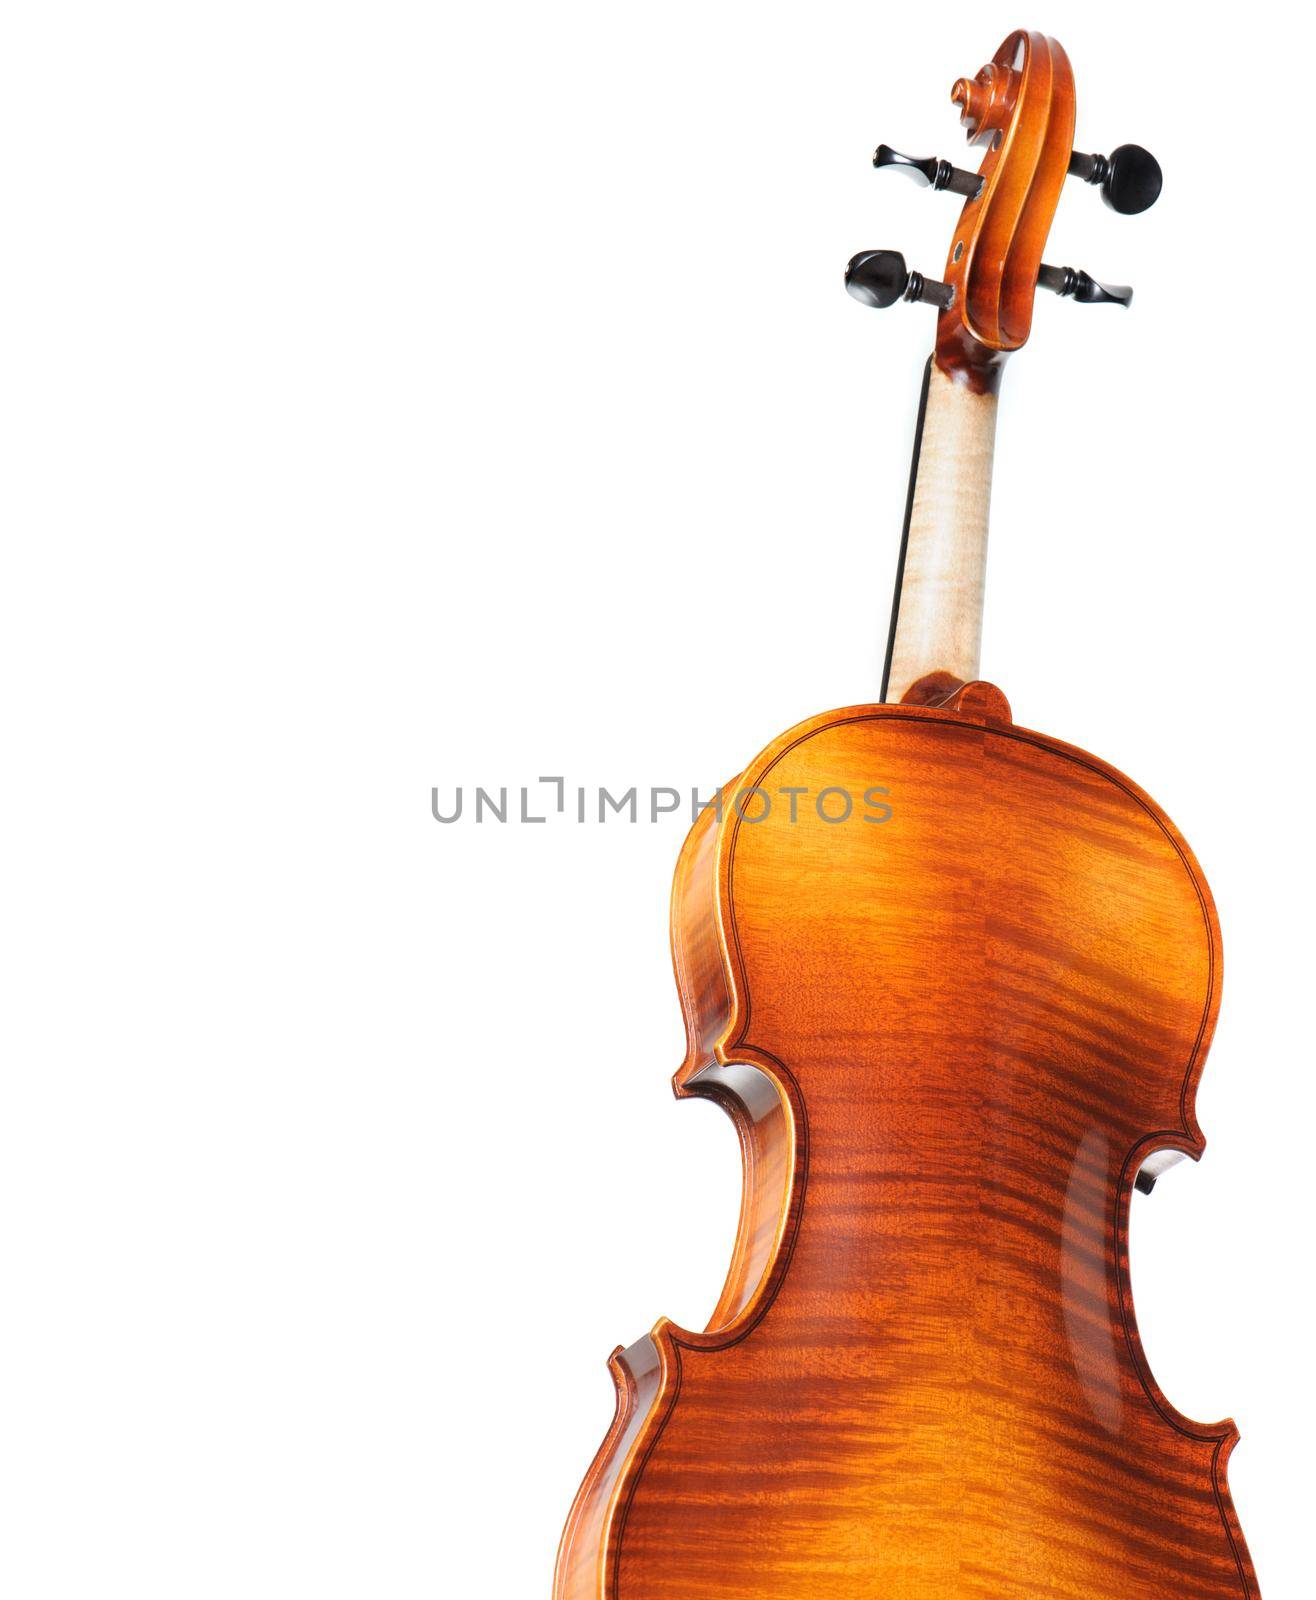 back of new classical violin on white background